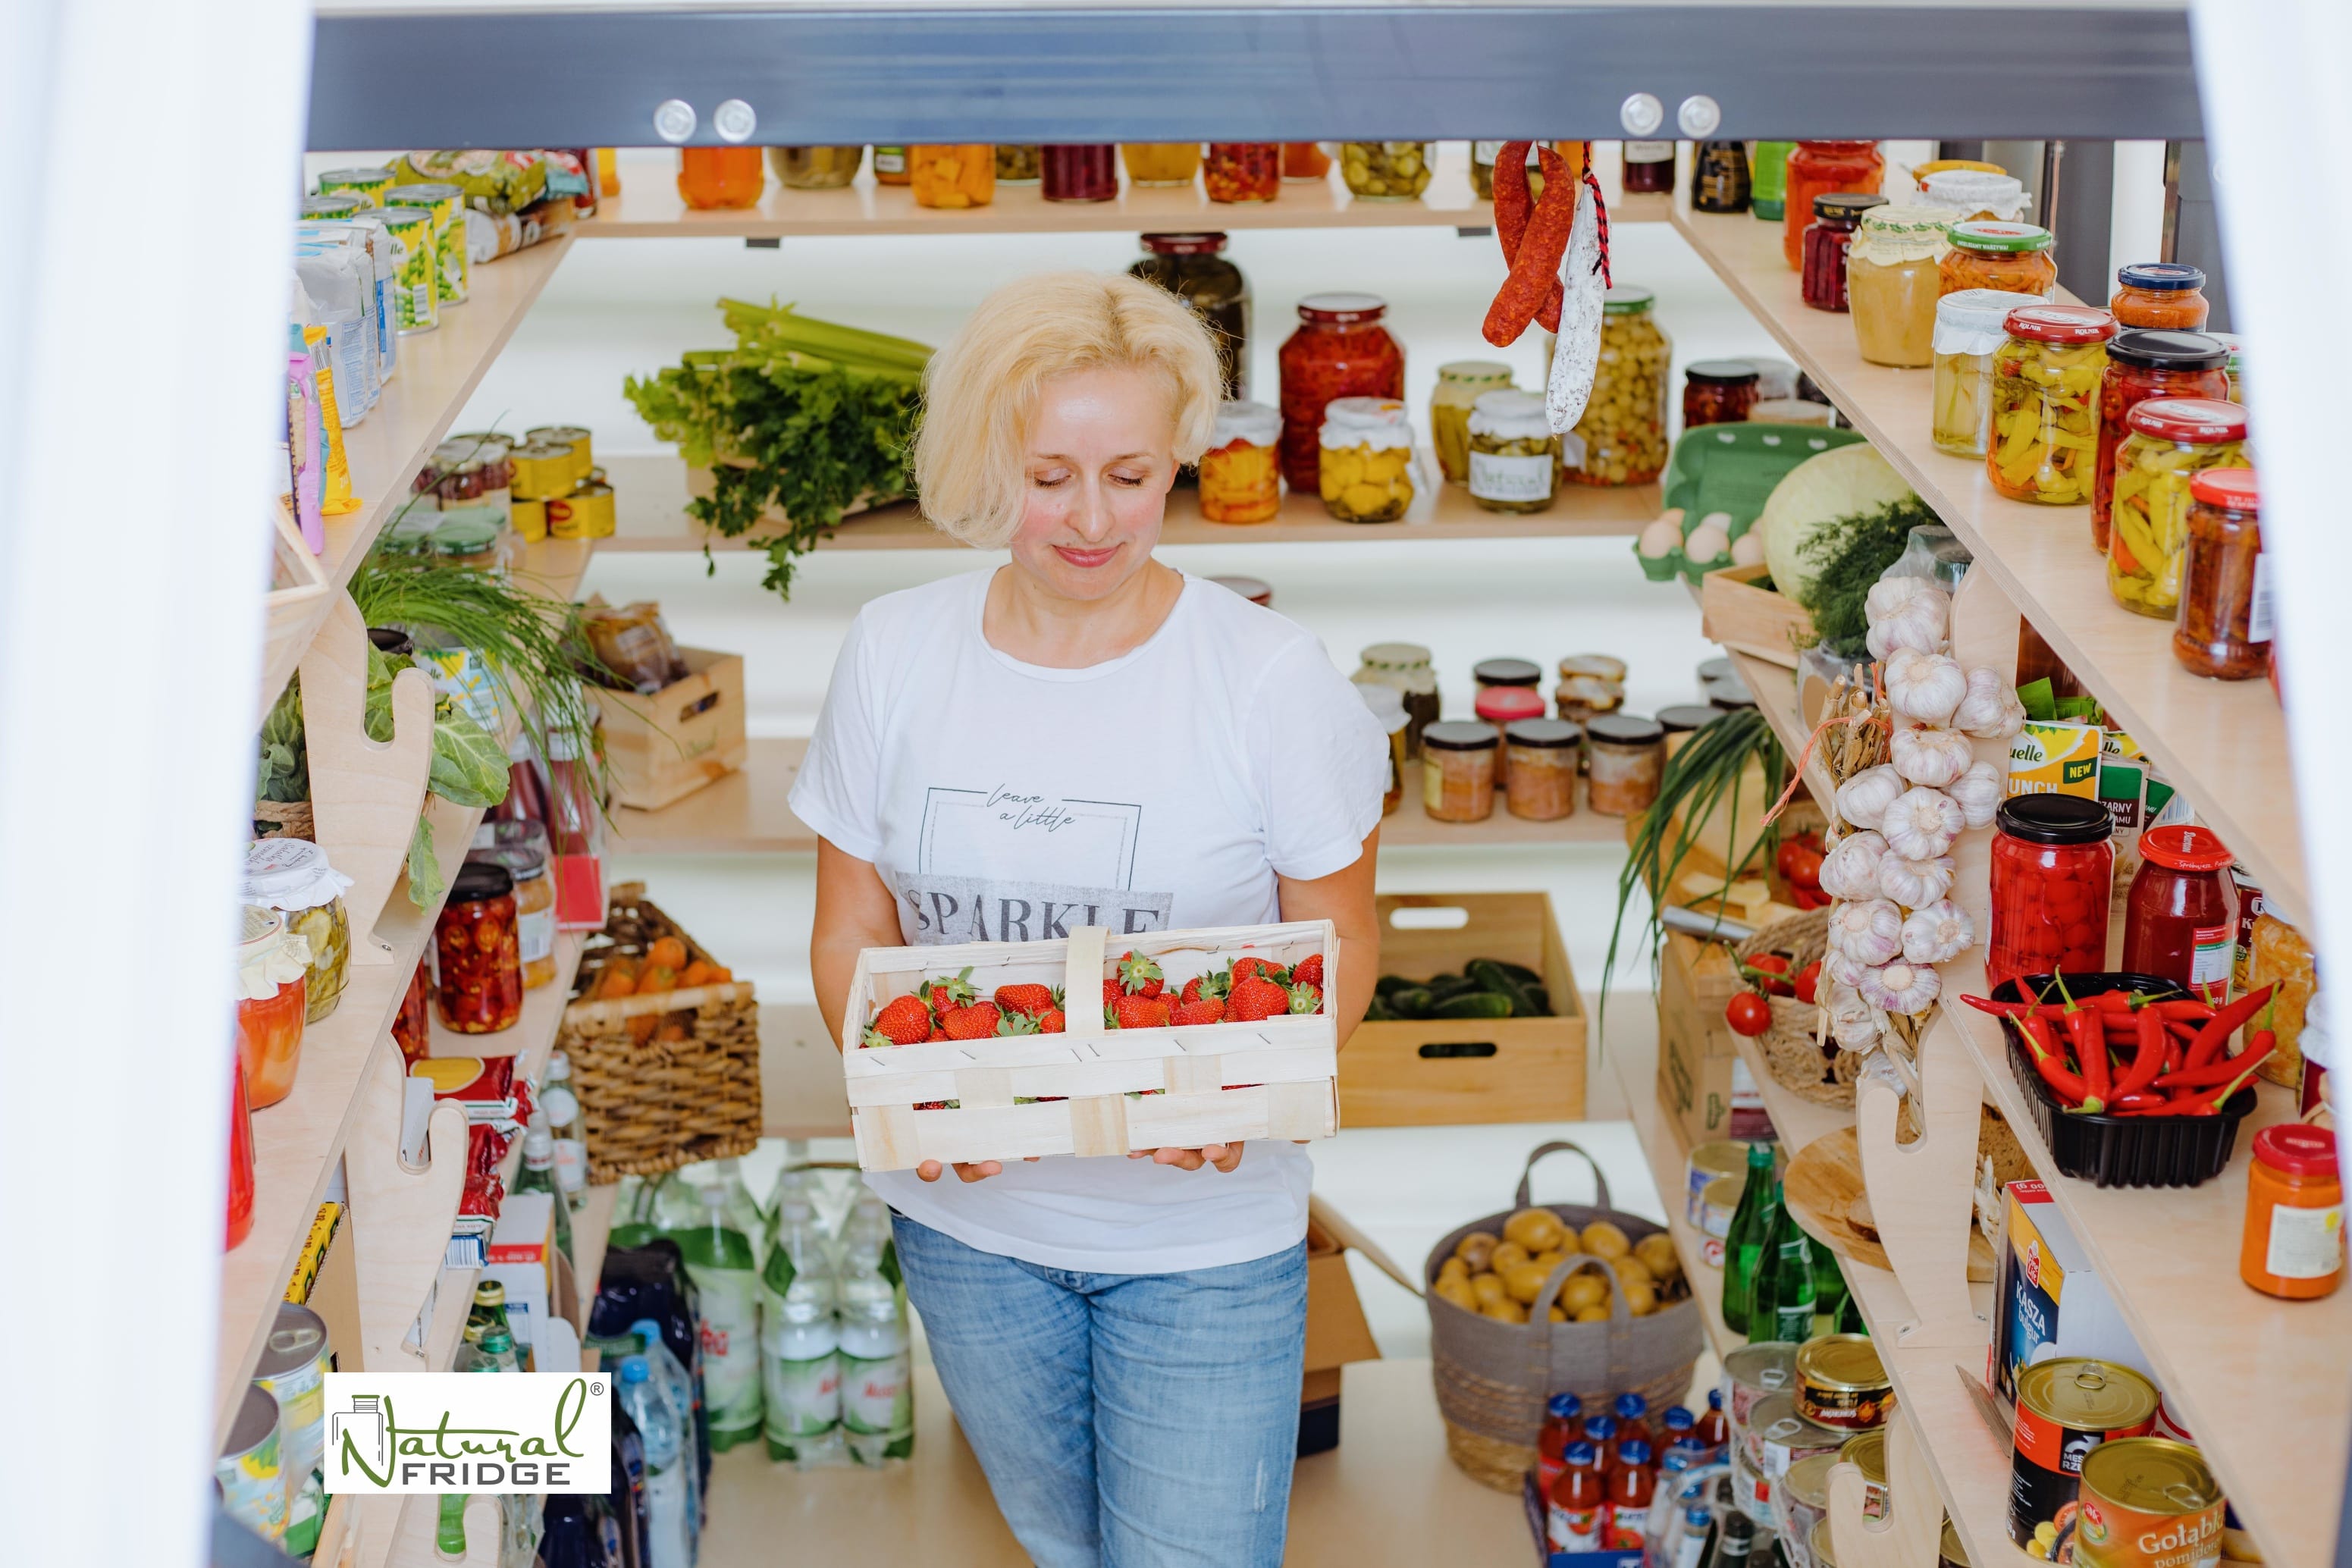 The cellar provides a lot of space inside. The floor area is up to 7 m2. This allows you to store many vegetables in bags directly on the floor. Putting preserves on the shelves is very convenient. Cellar 200x350 Natural Fridge Gross price 9 296 EUR